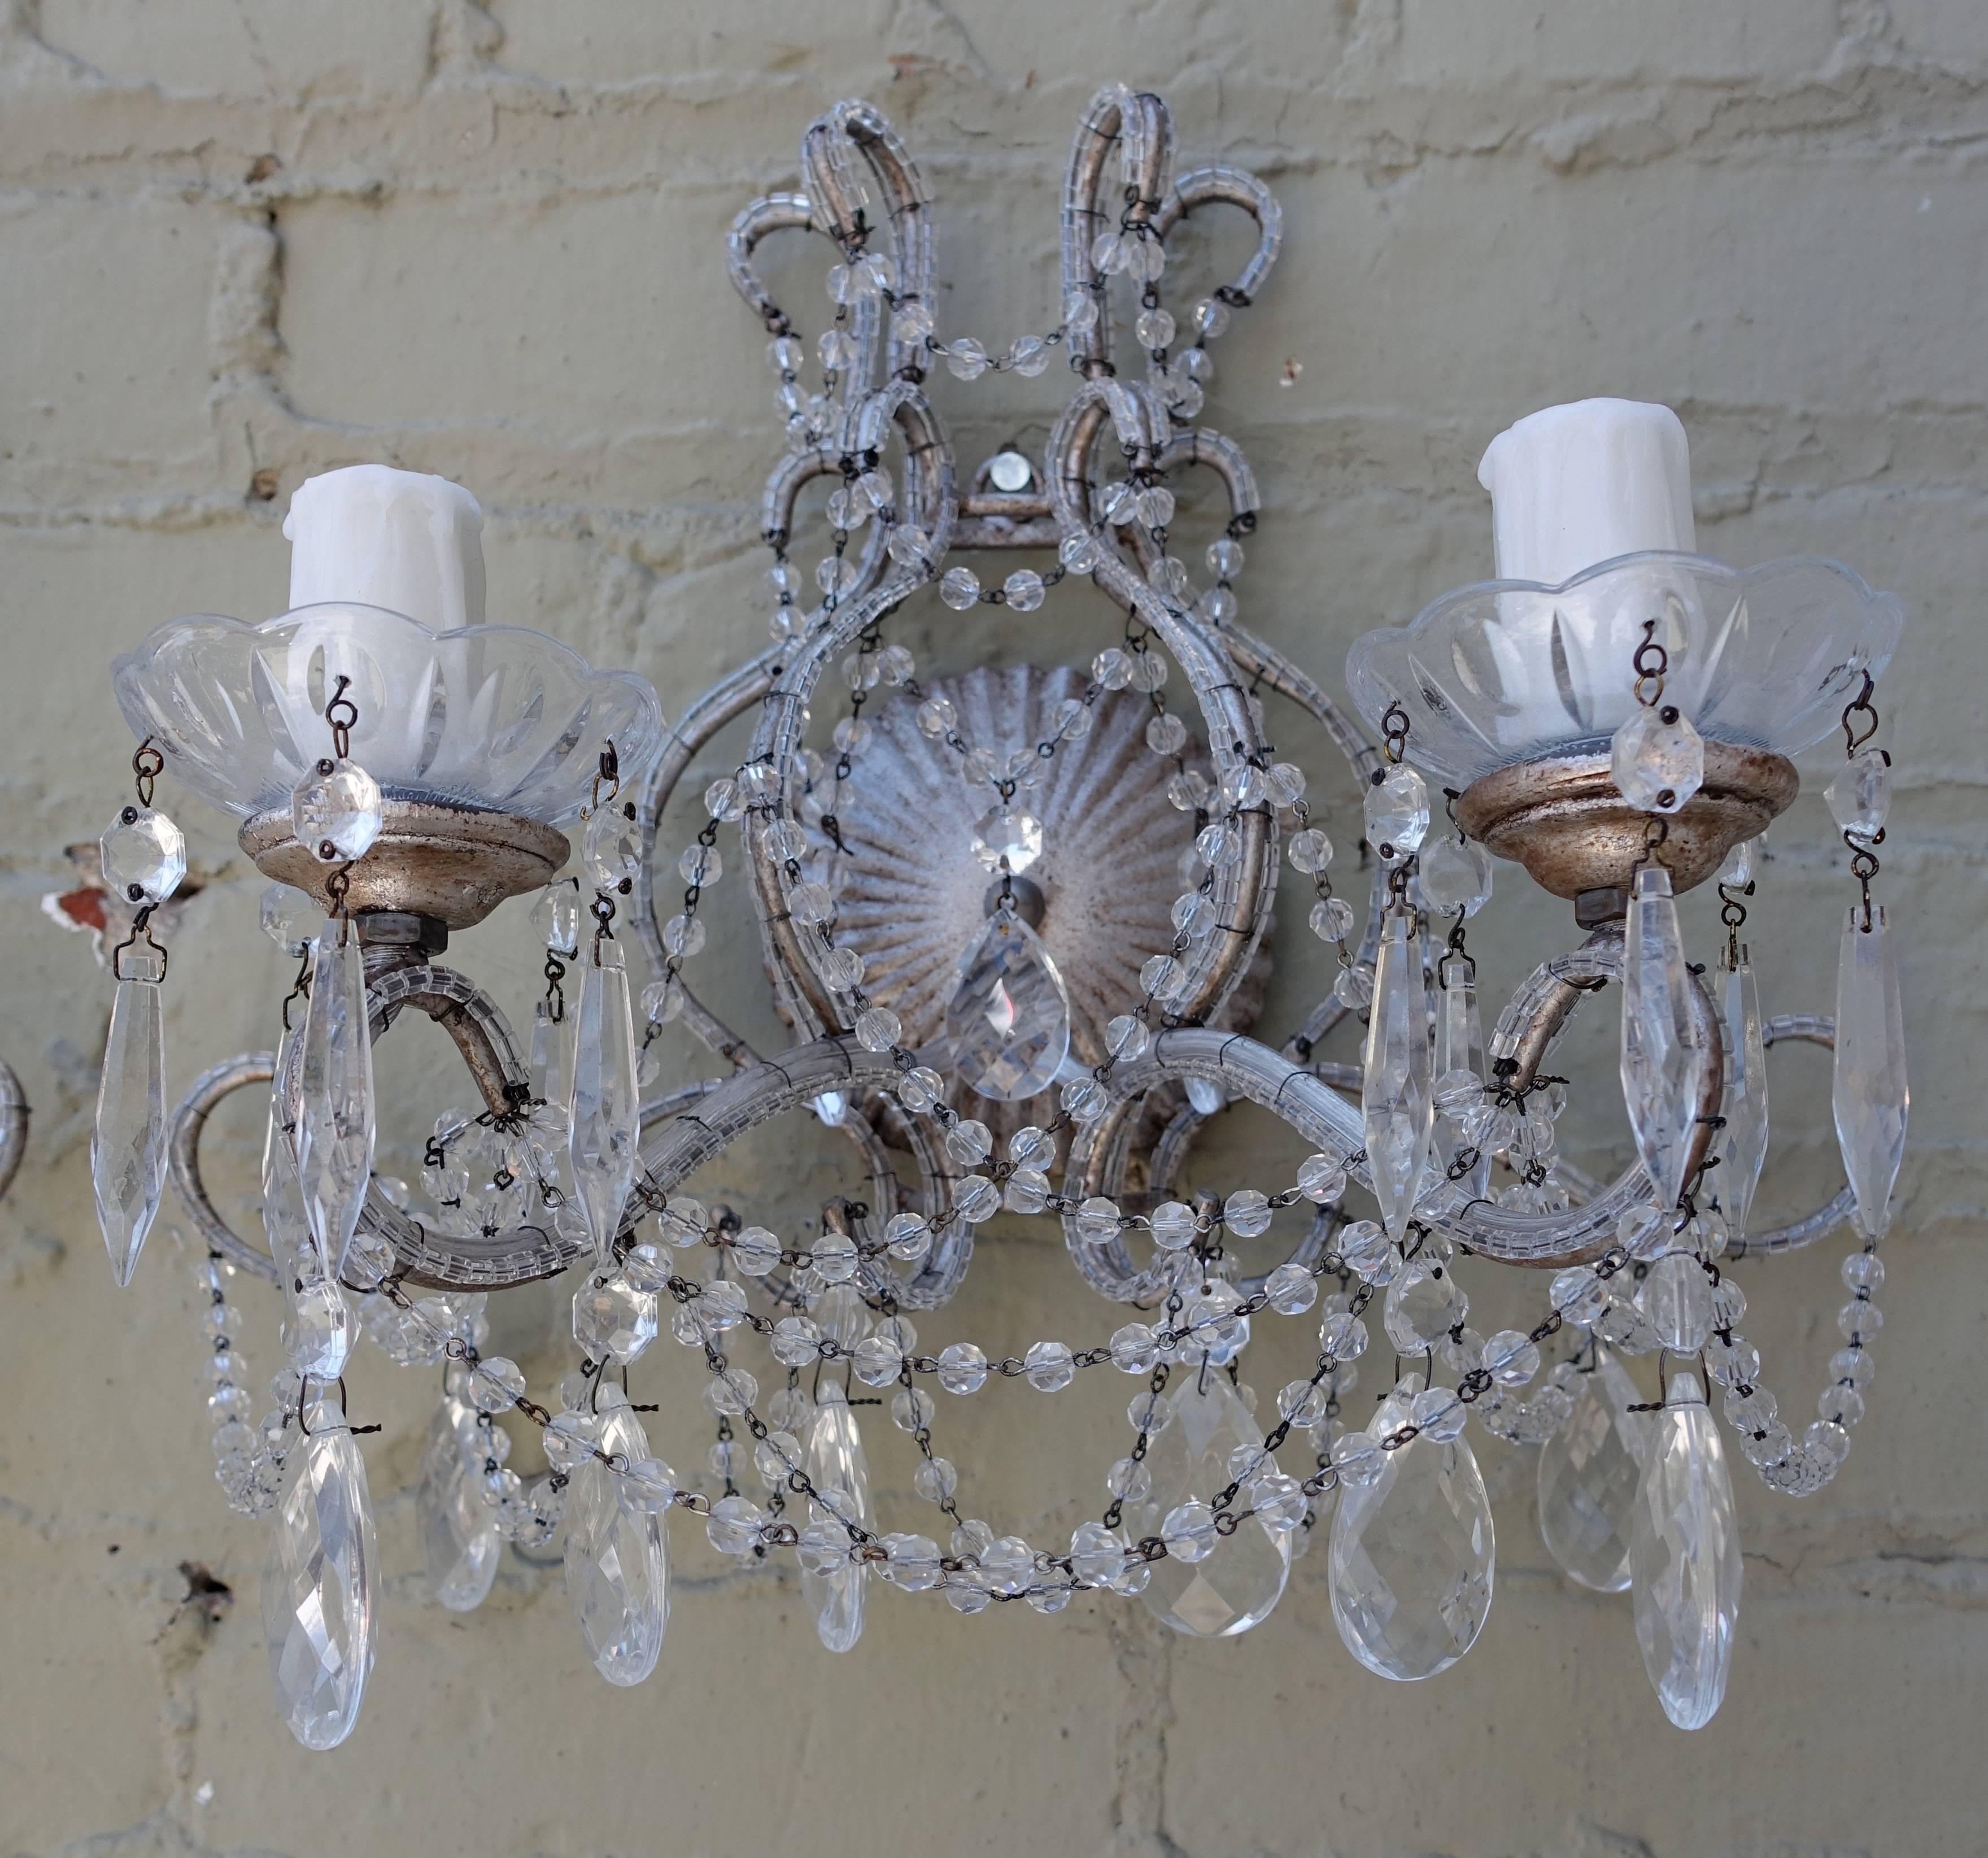 Pair of two-light silver and crystal beaded sconces. These sconces are newly wired with drip wax candle covers and are ready to install.